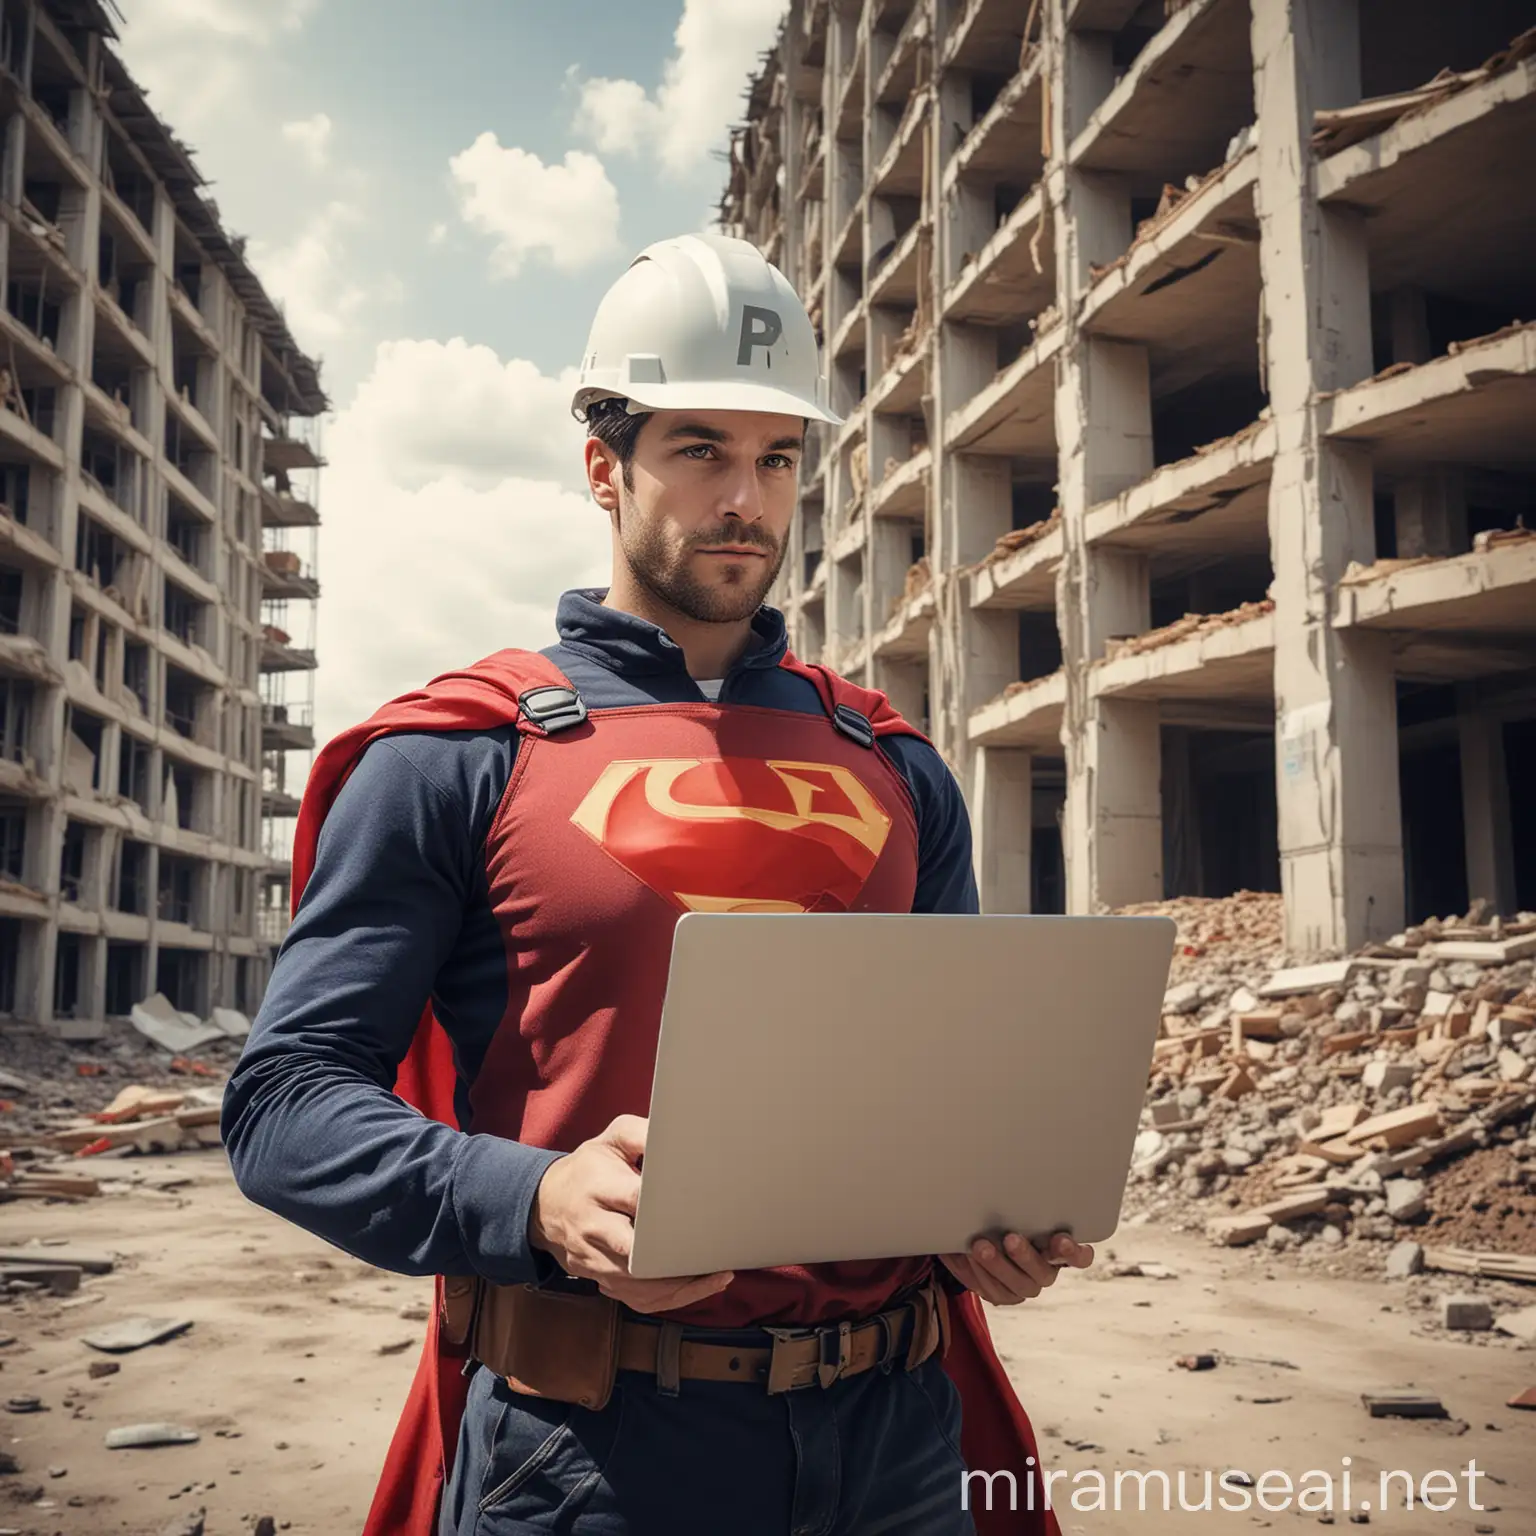 Superhero Architect with Laptop and Shield at Residential Construction Site